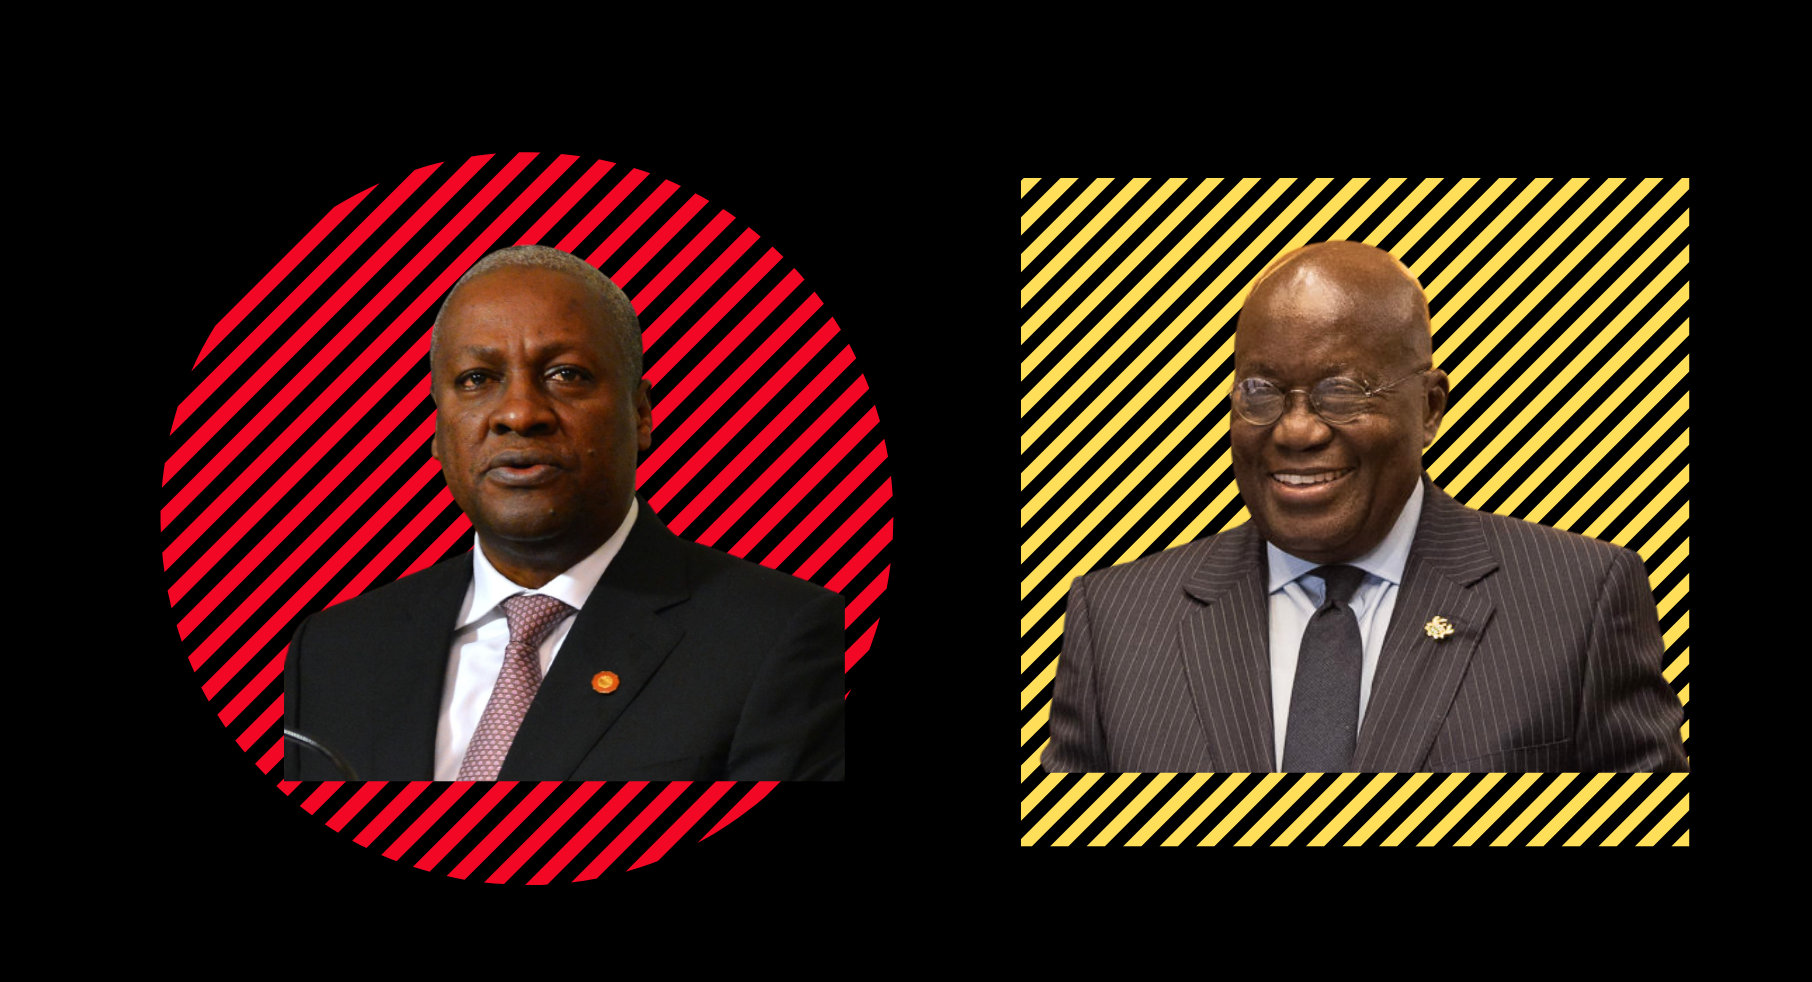 The Many-Faced god: Ghana Goes to the Polls